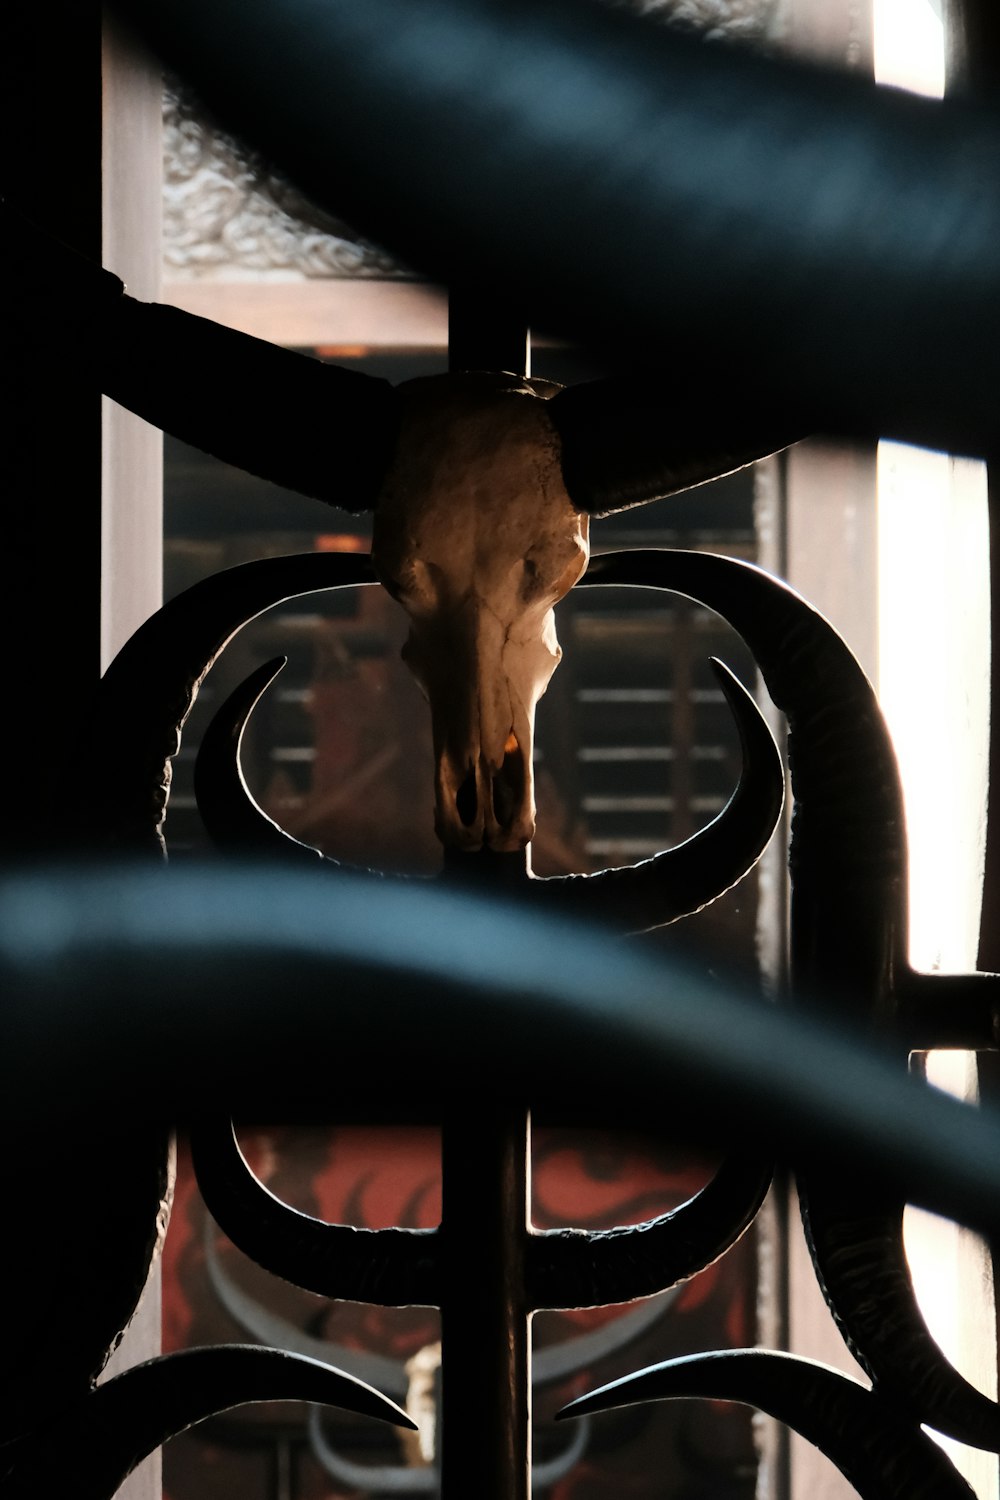 a cow's head sticking out of a metal gate